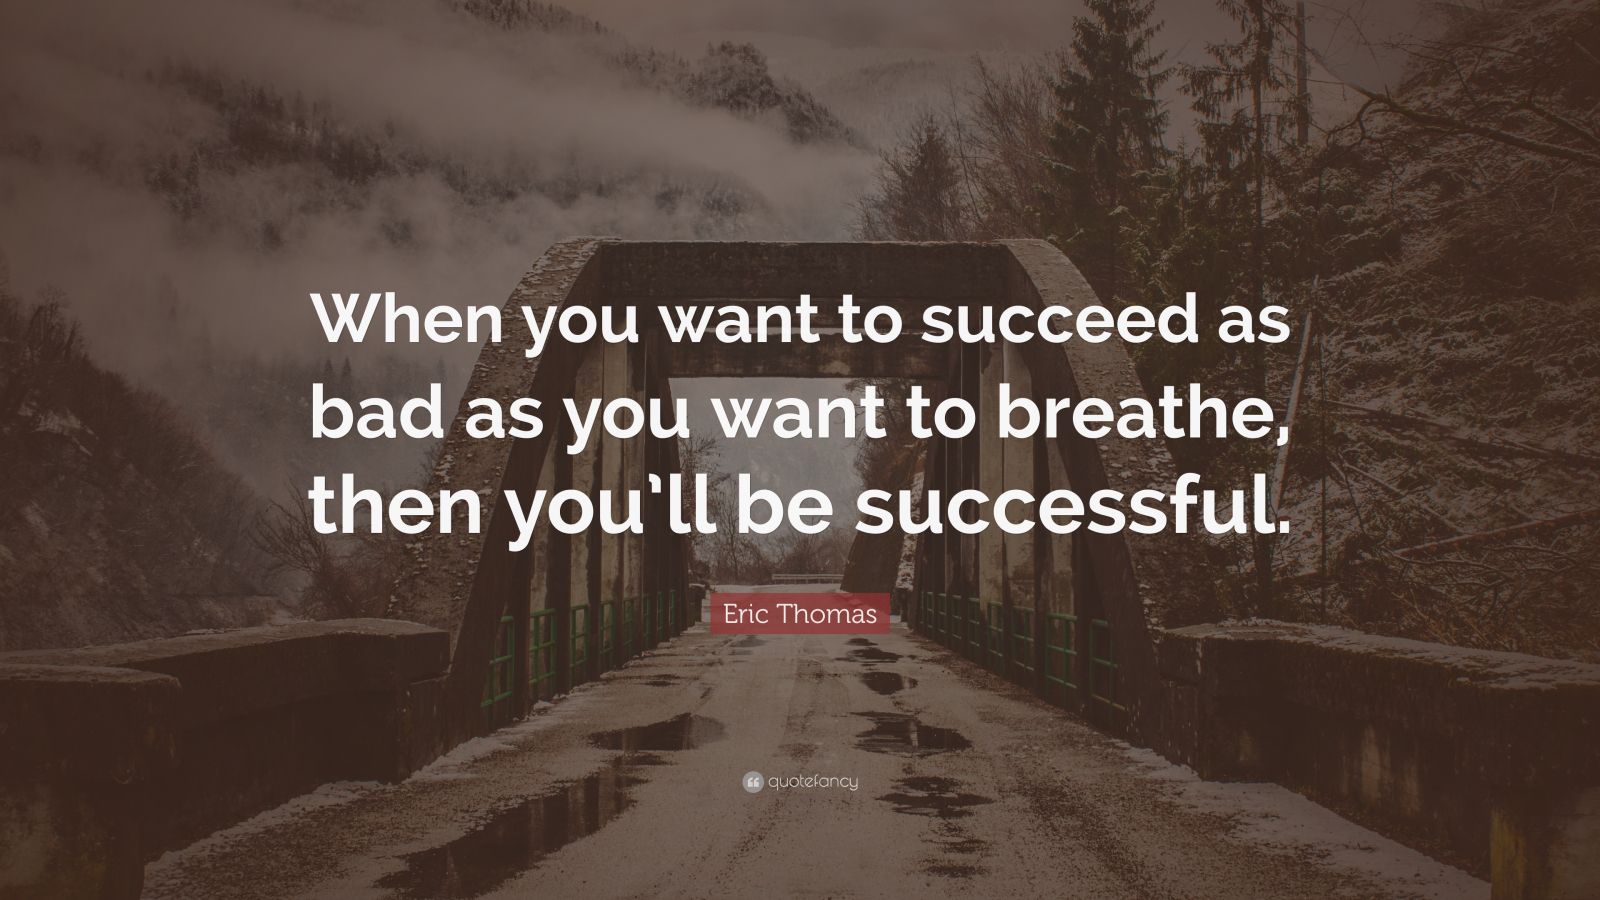 Eric Thomas Quote: “When you want to succeed as bad as you 